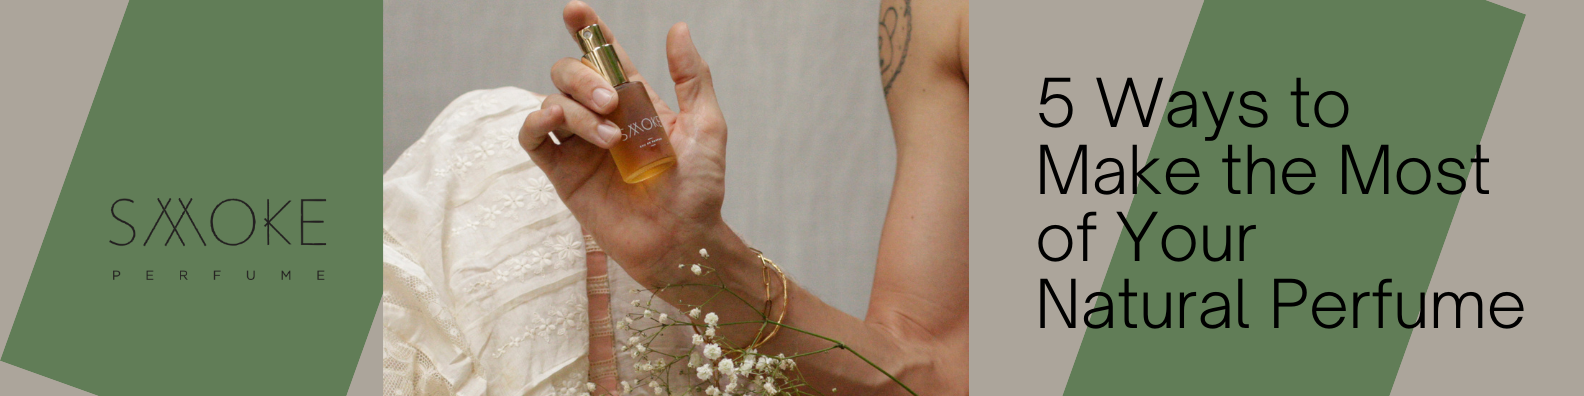 5 Ways to Make the Most of Your Natural Perfume